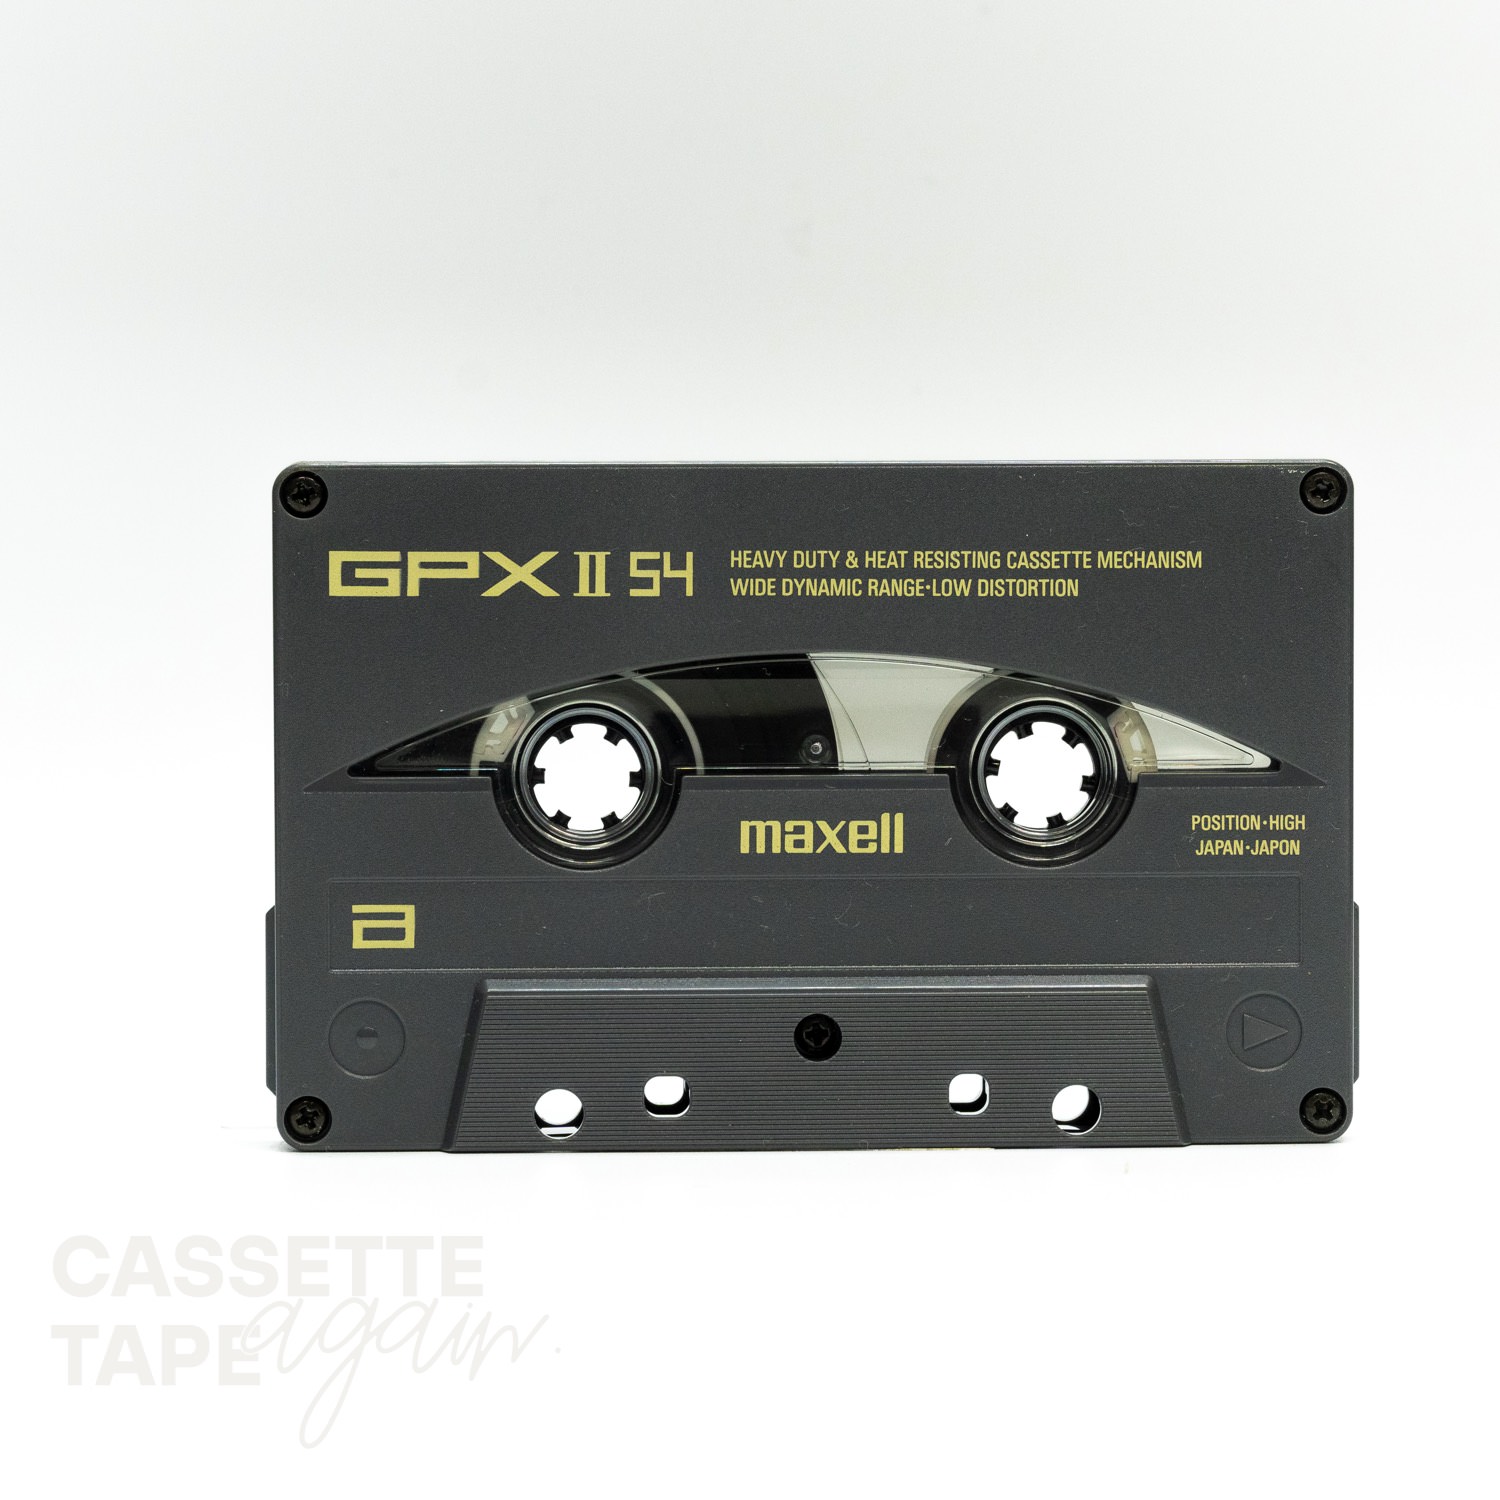 GPX2 54 54 / maxell(メタル) - CASSETTE TAPE again.